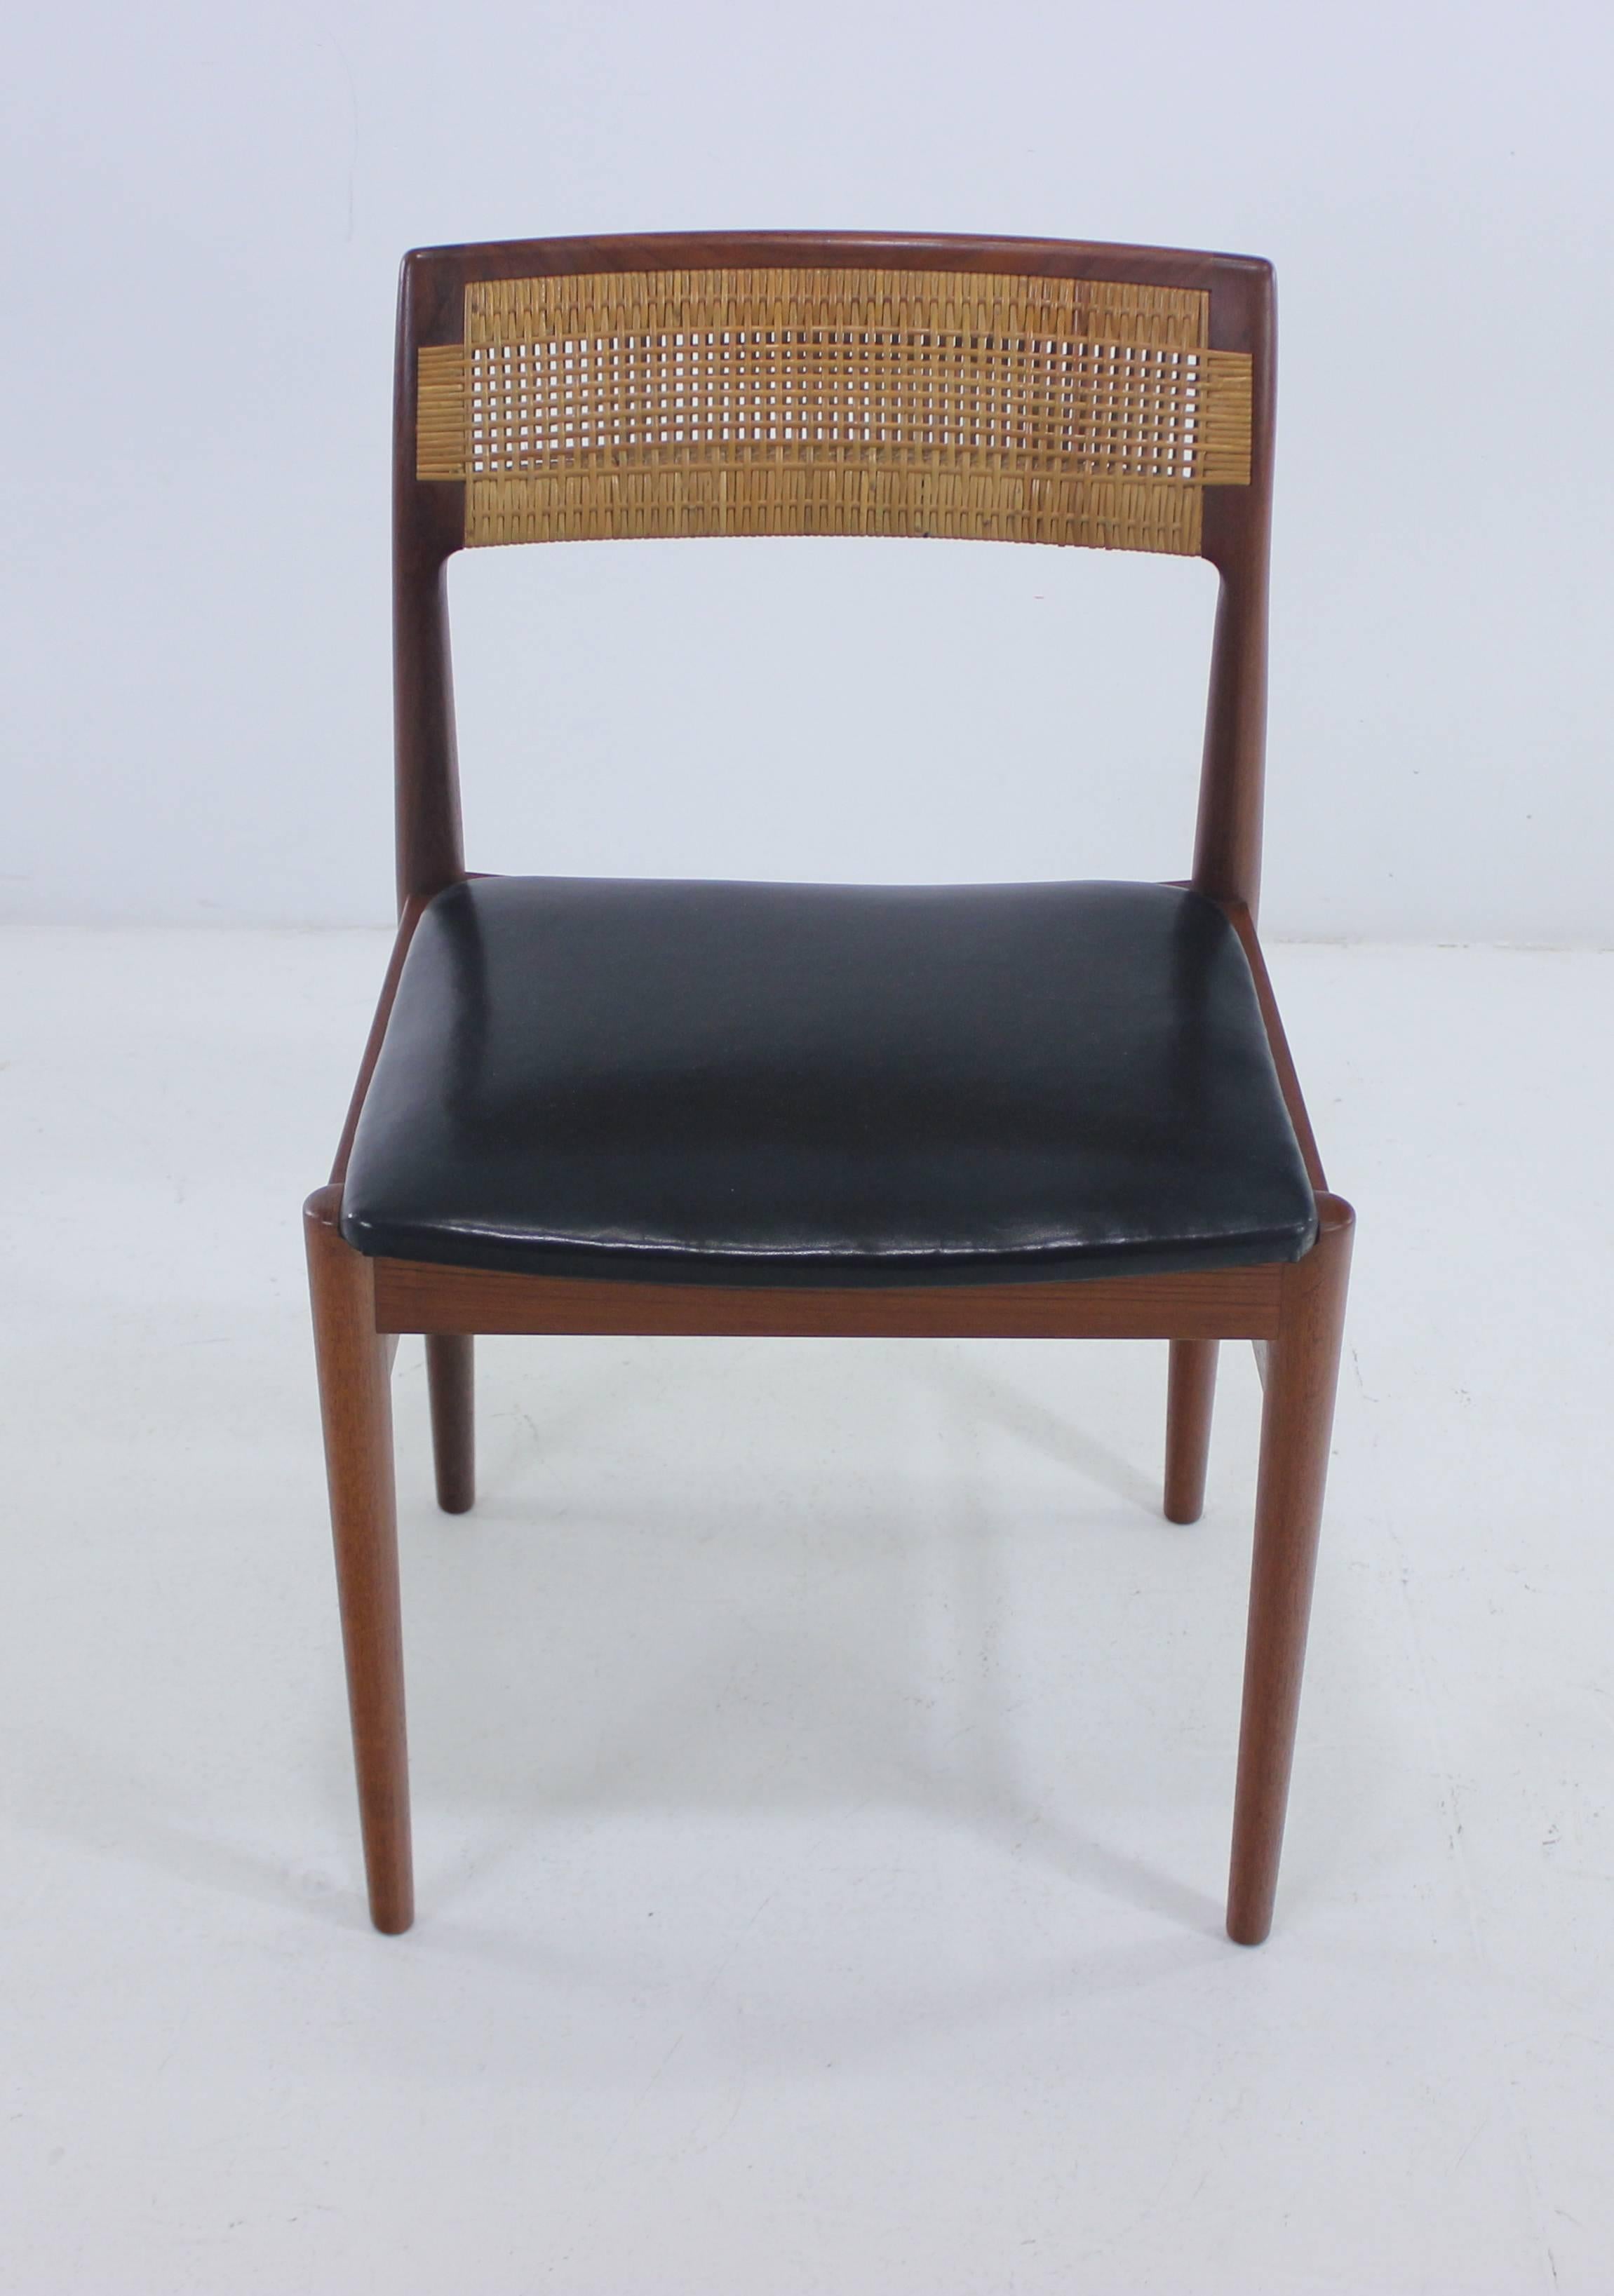 Eight Danish modern armchairs designed by Erik Worts.
Timeless and rare.
Henrik Wørts Møbelsnedkeri, maker.
Rich teak with newly caned backs.
Original leather seats.
Matchless quality and price.
Low freight and quick ship.